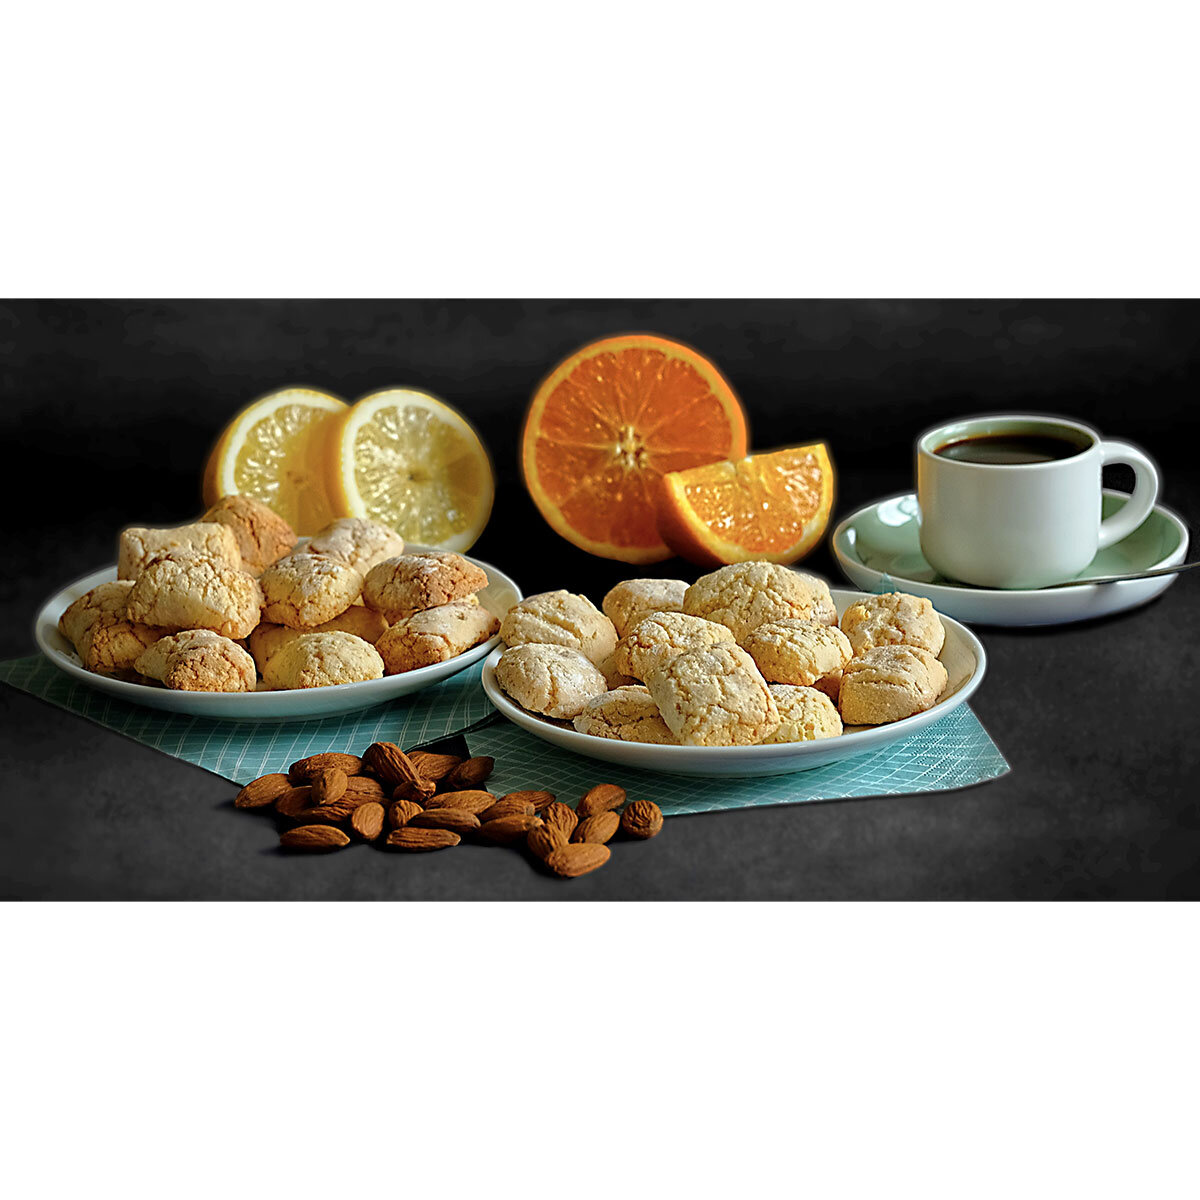 Orange and Lemon Biscottini Bites on a plate with lemons and oranges behind